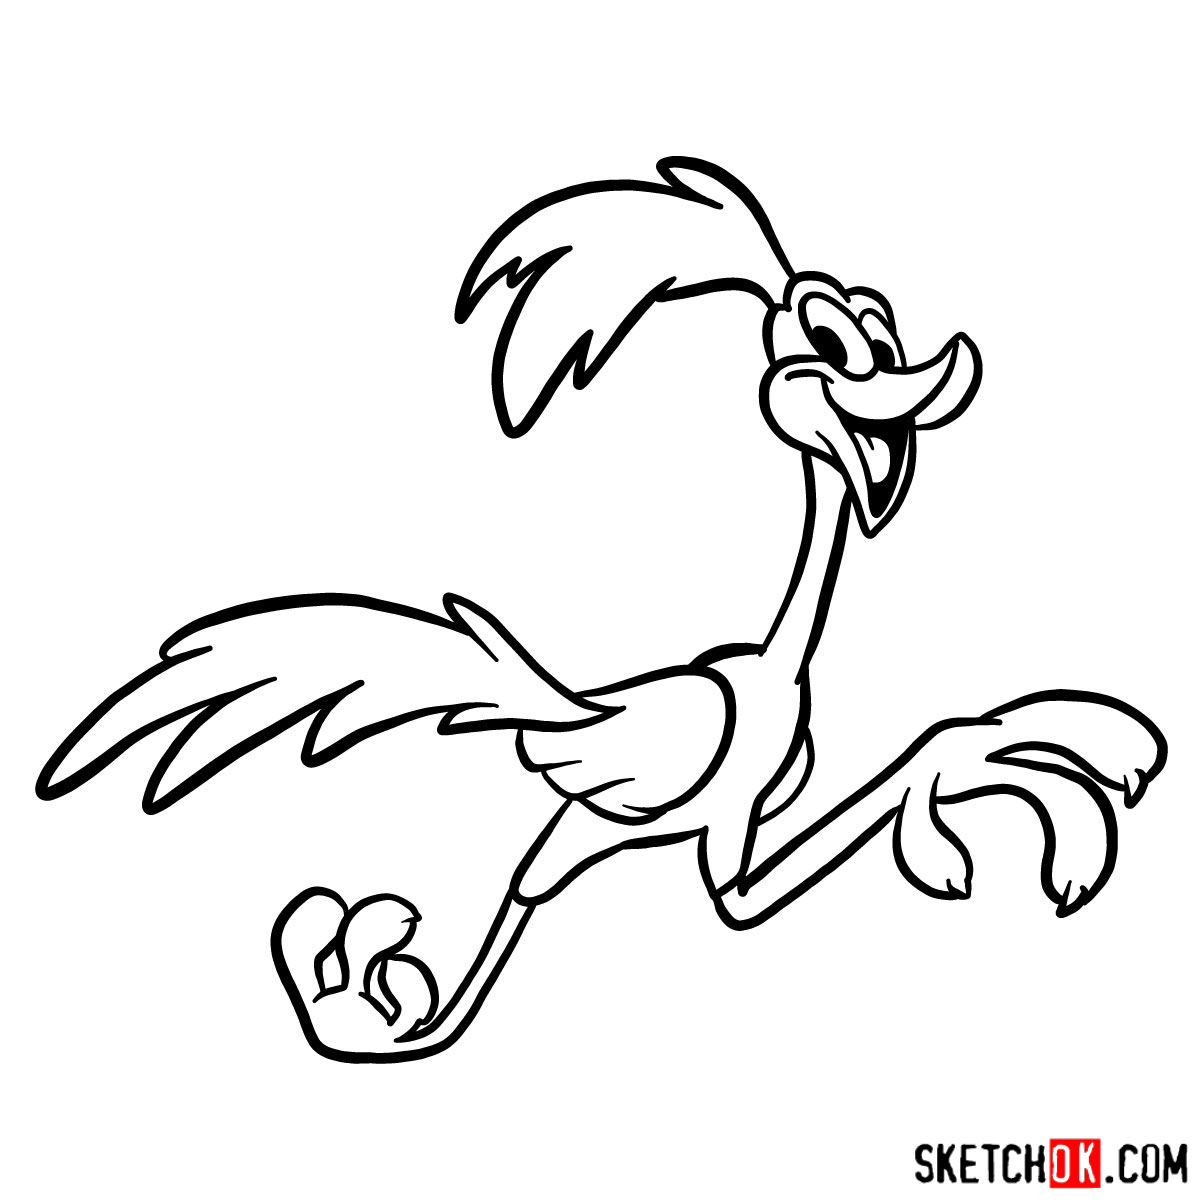 How to draw Road Runner - step 11